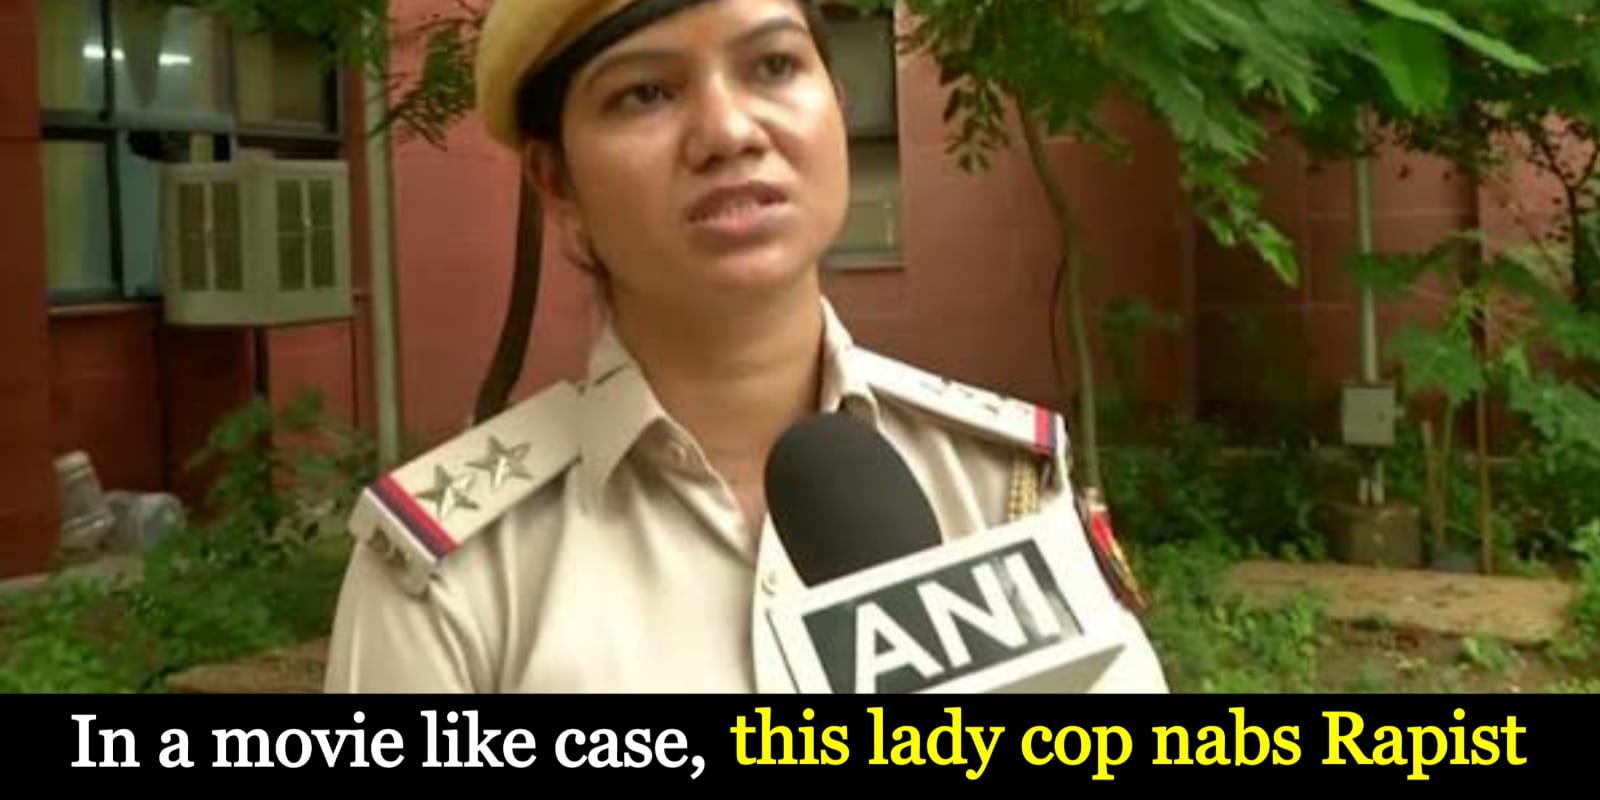 Female police officer sends a friend request to a Rapist, arrests him on first date